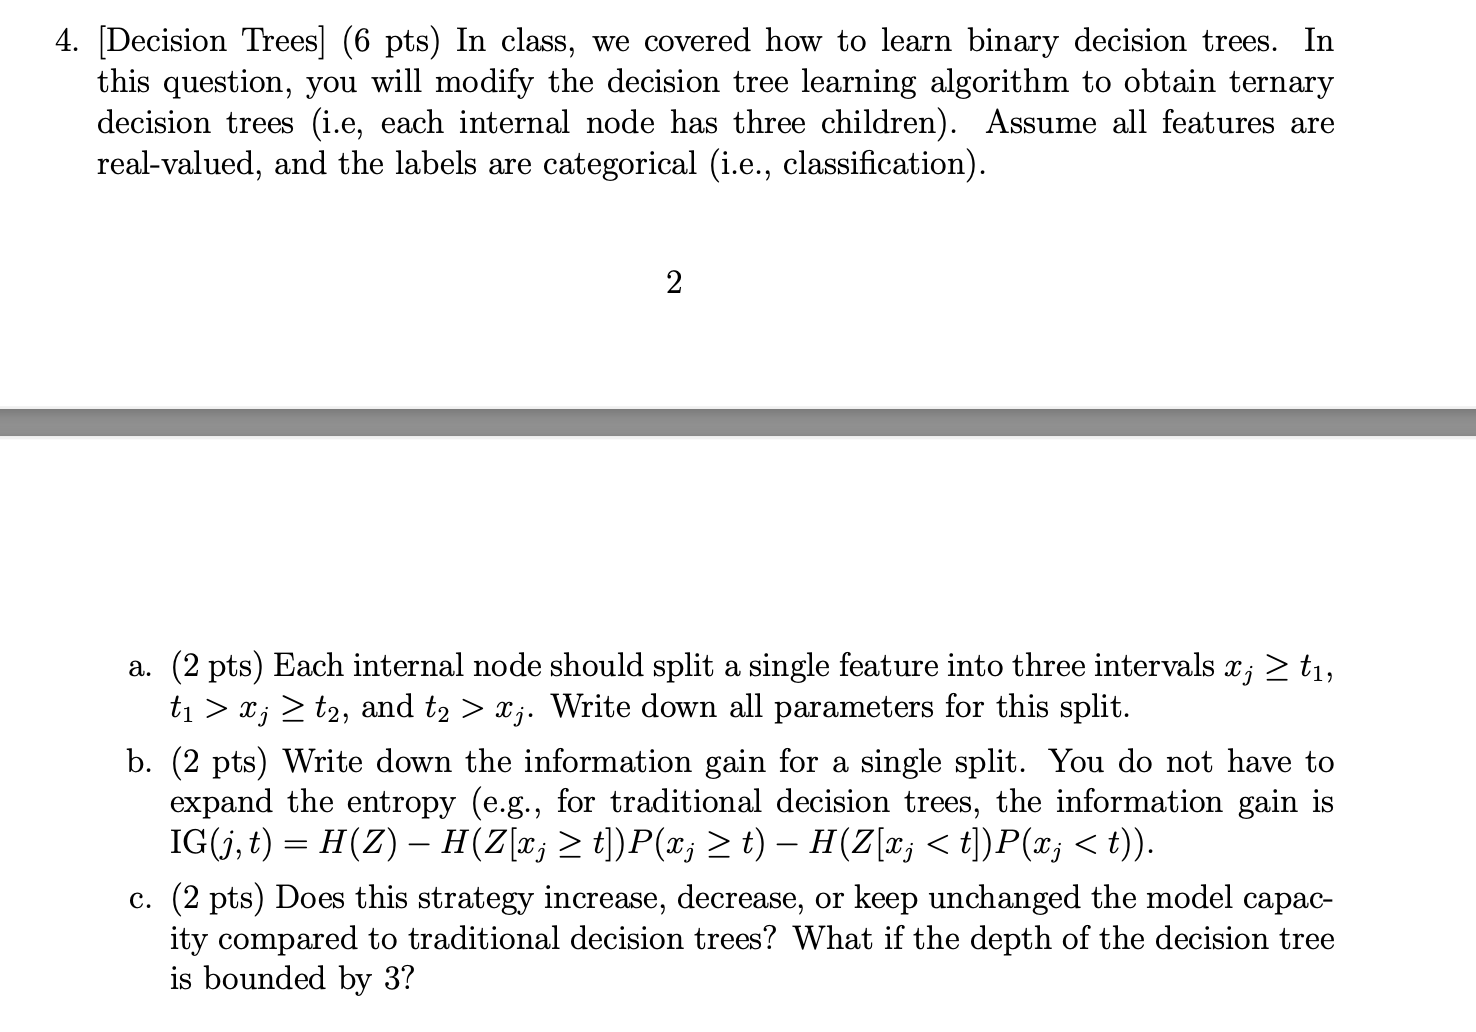 4. [Decision Trees] (6 pts) In class, we covered how to learn binary decision trees. In this question, you